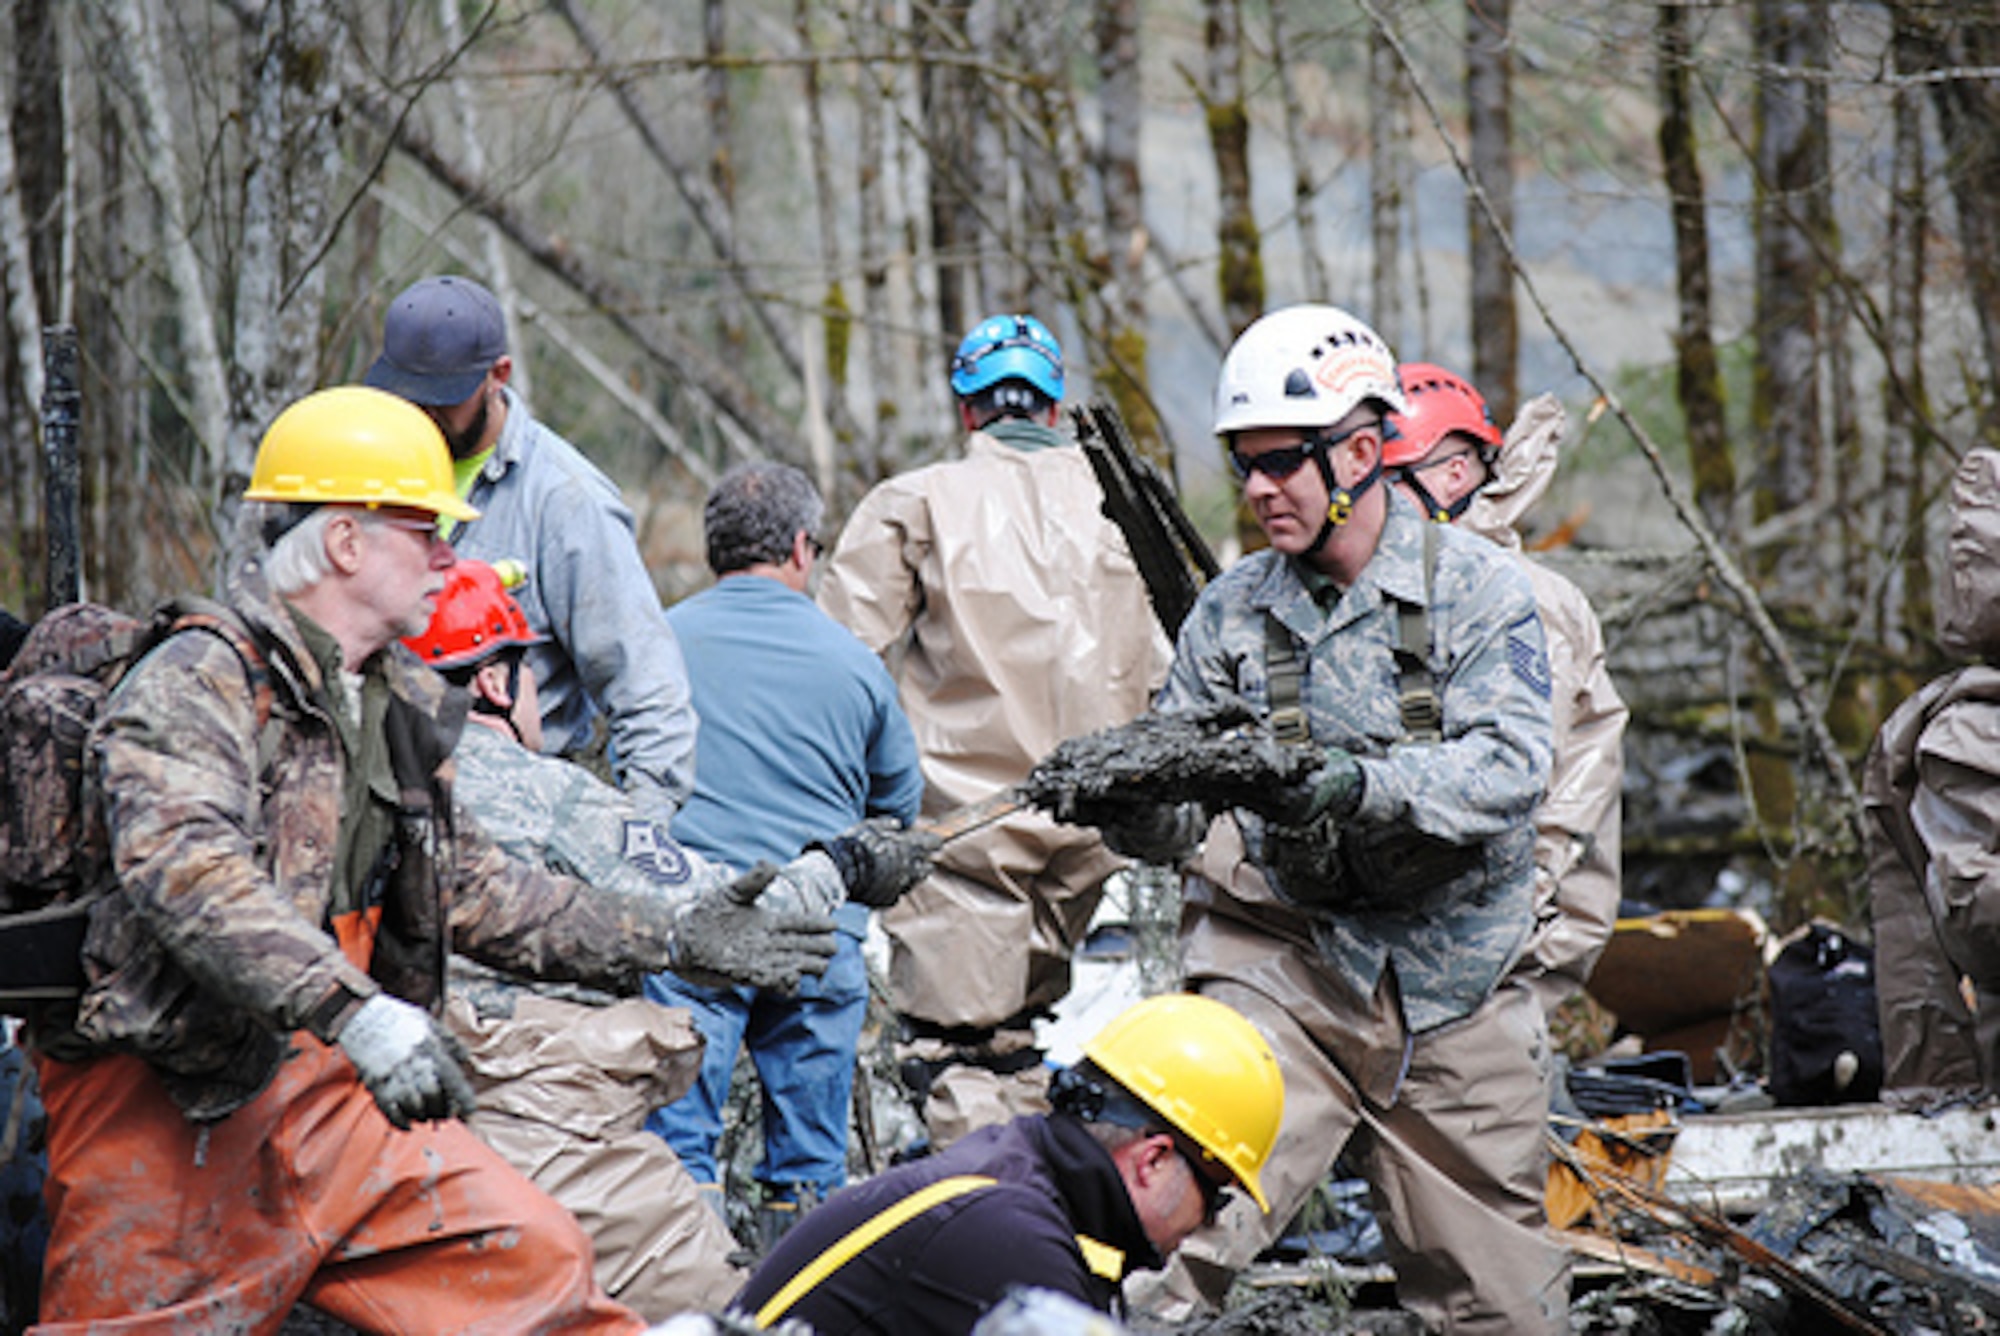 Washington Air National Guardsmen methodically make their way through the mud and wreckage left behind by Saturday's mudslide in Oso, Wash. More than 70 guardsmen have been activated to support the search and rescue efforts. (Photo by Spc. Matthew Sissel, 122D PAOC)